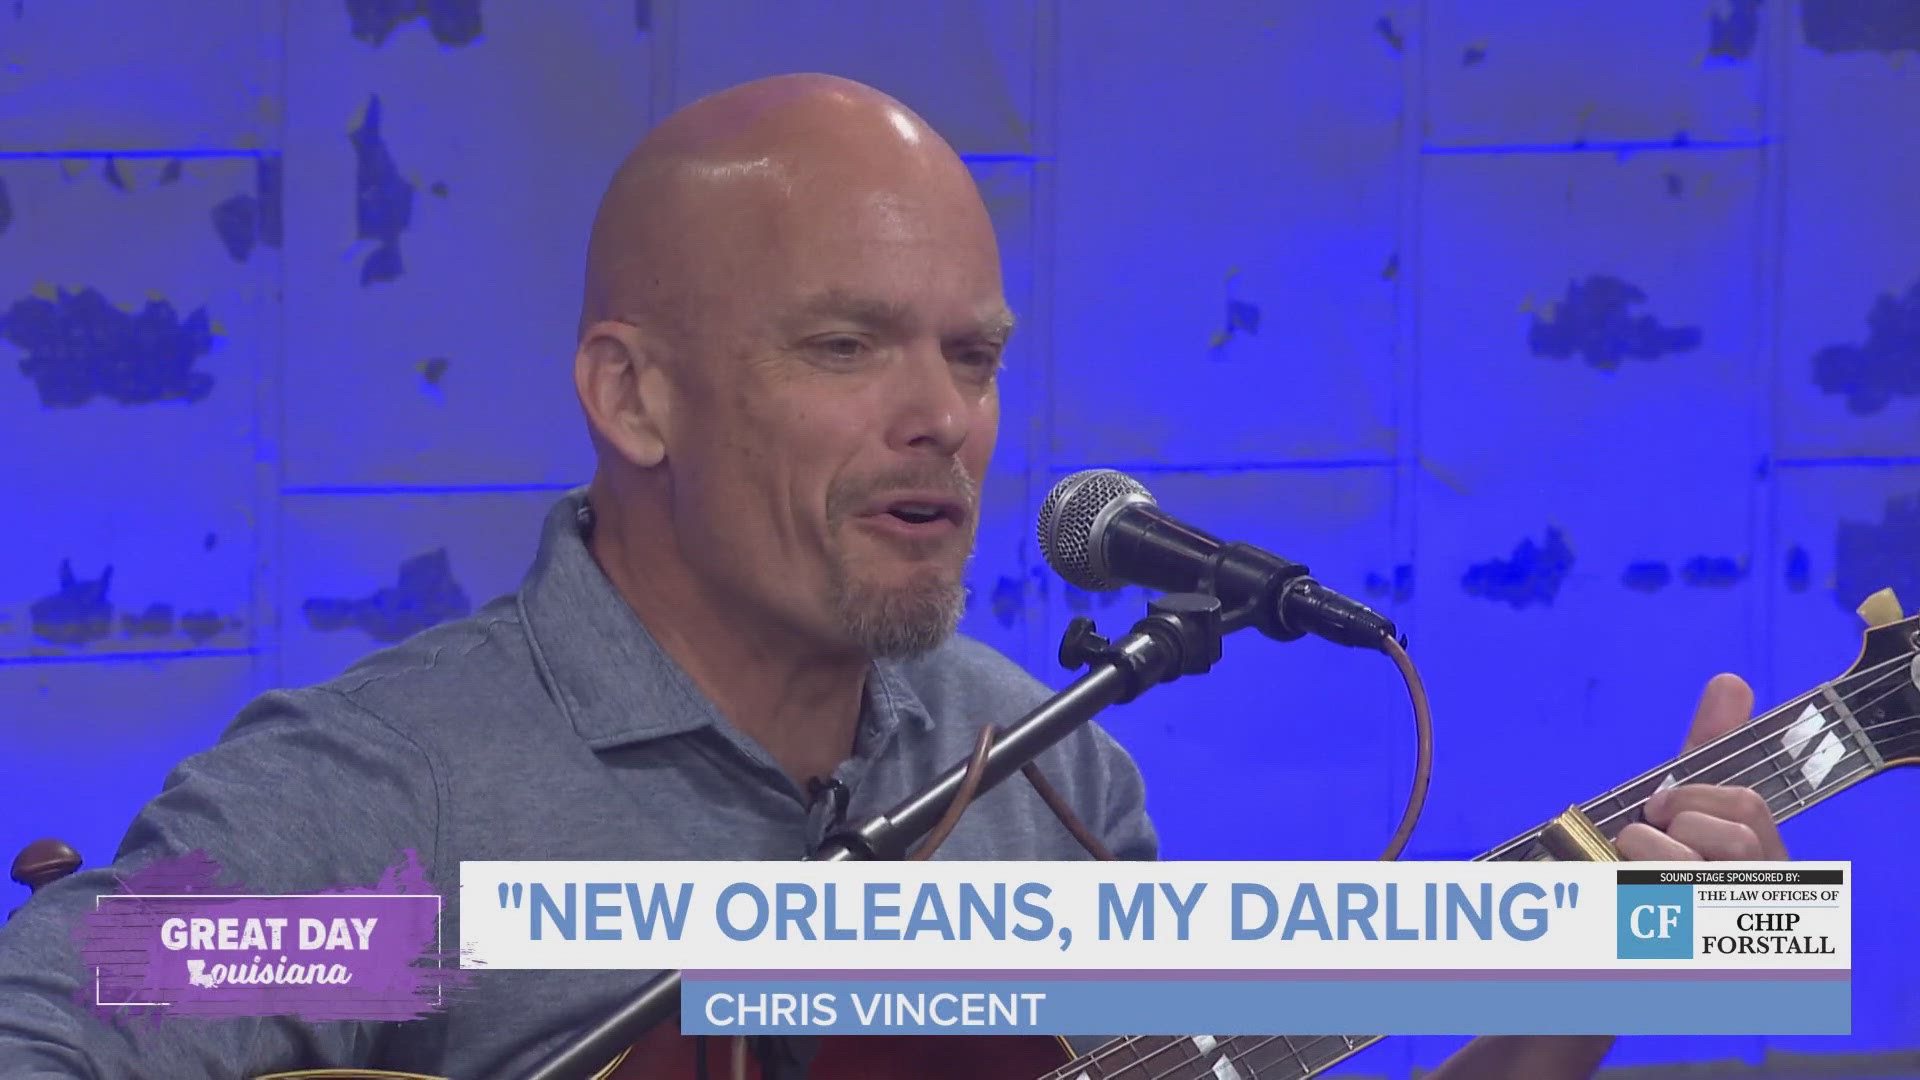 We talk with Chris Vincent about his new album and how he is sharing a story of resilience.